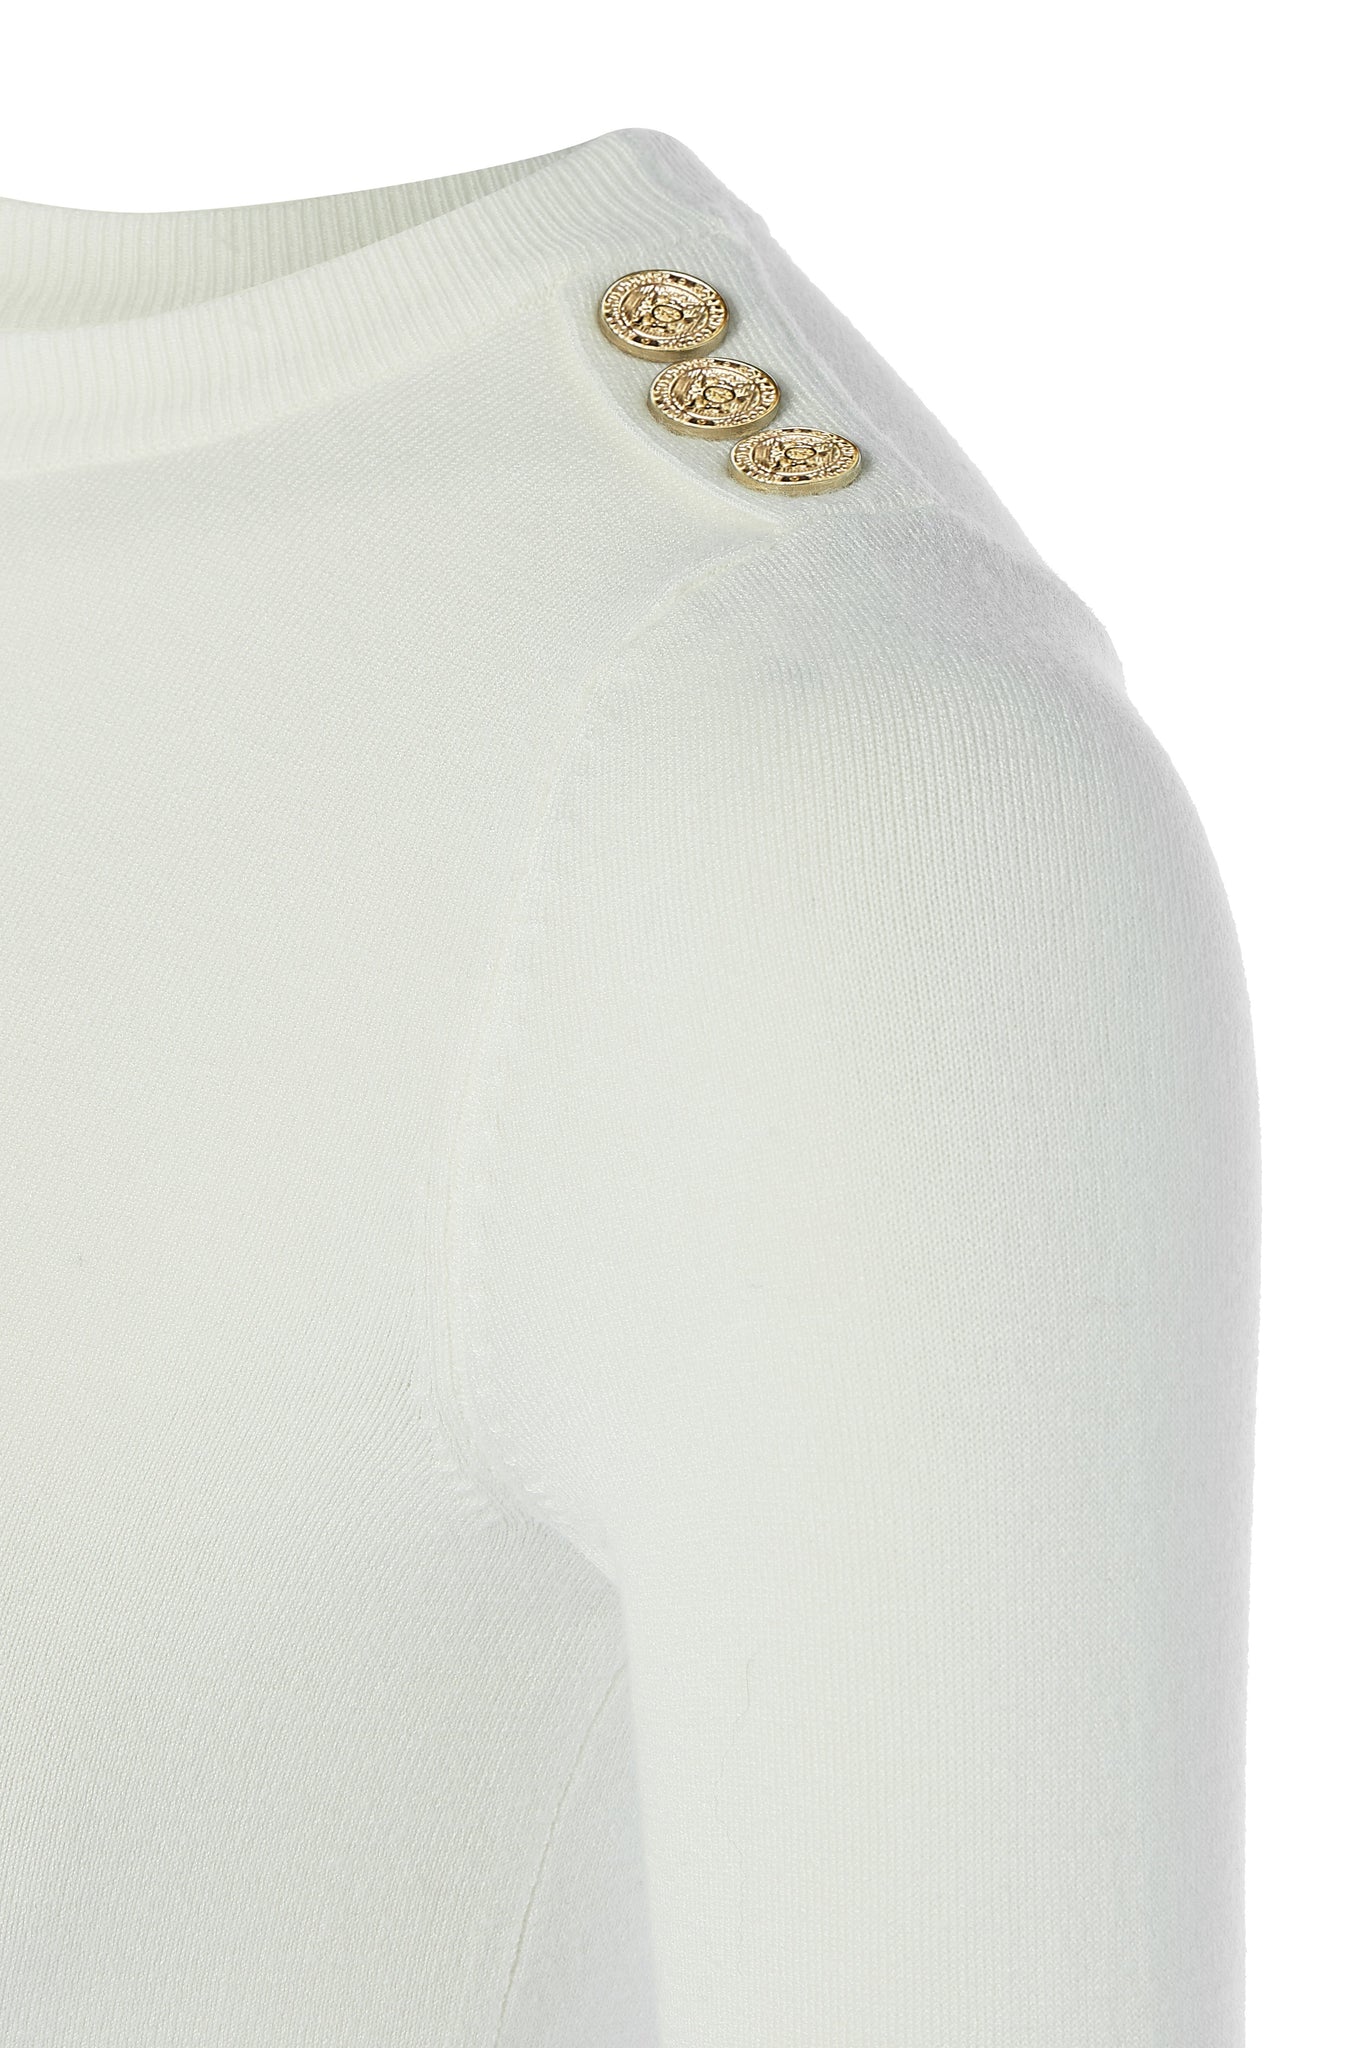 gold button detail across shoulders of super soft lightweight jumper in cream with ribbed crew neck collar, cuffs and hem 